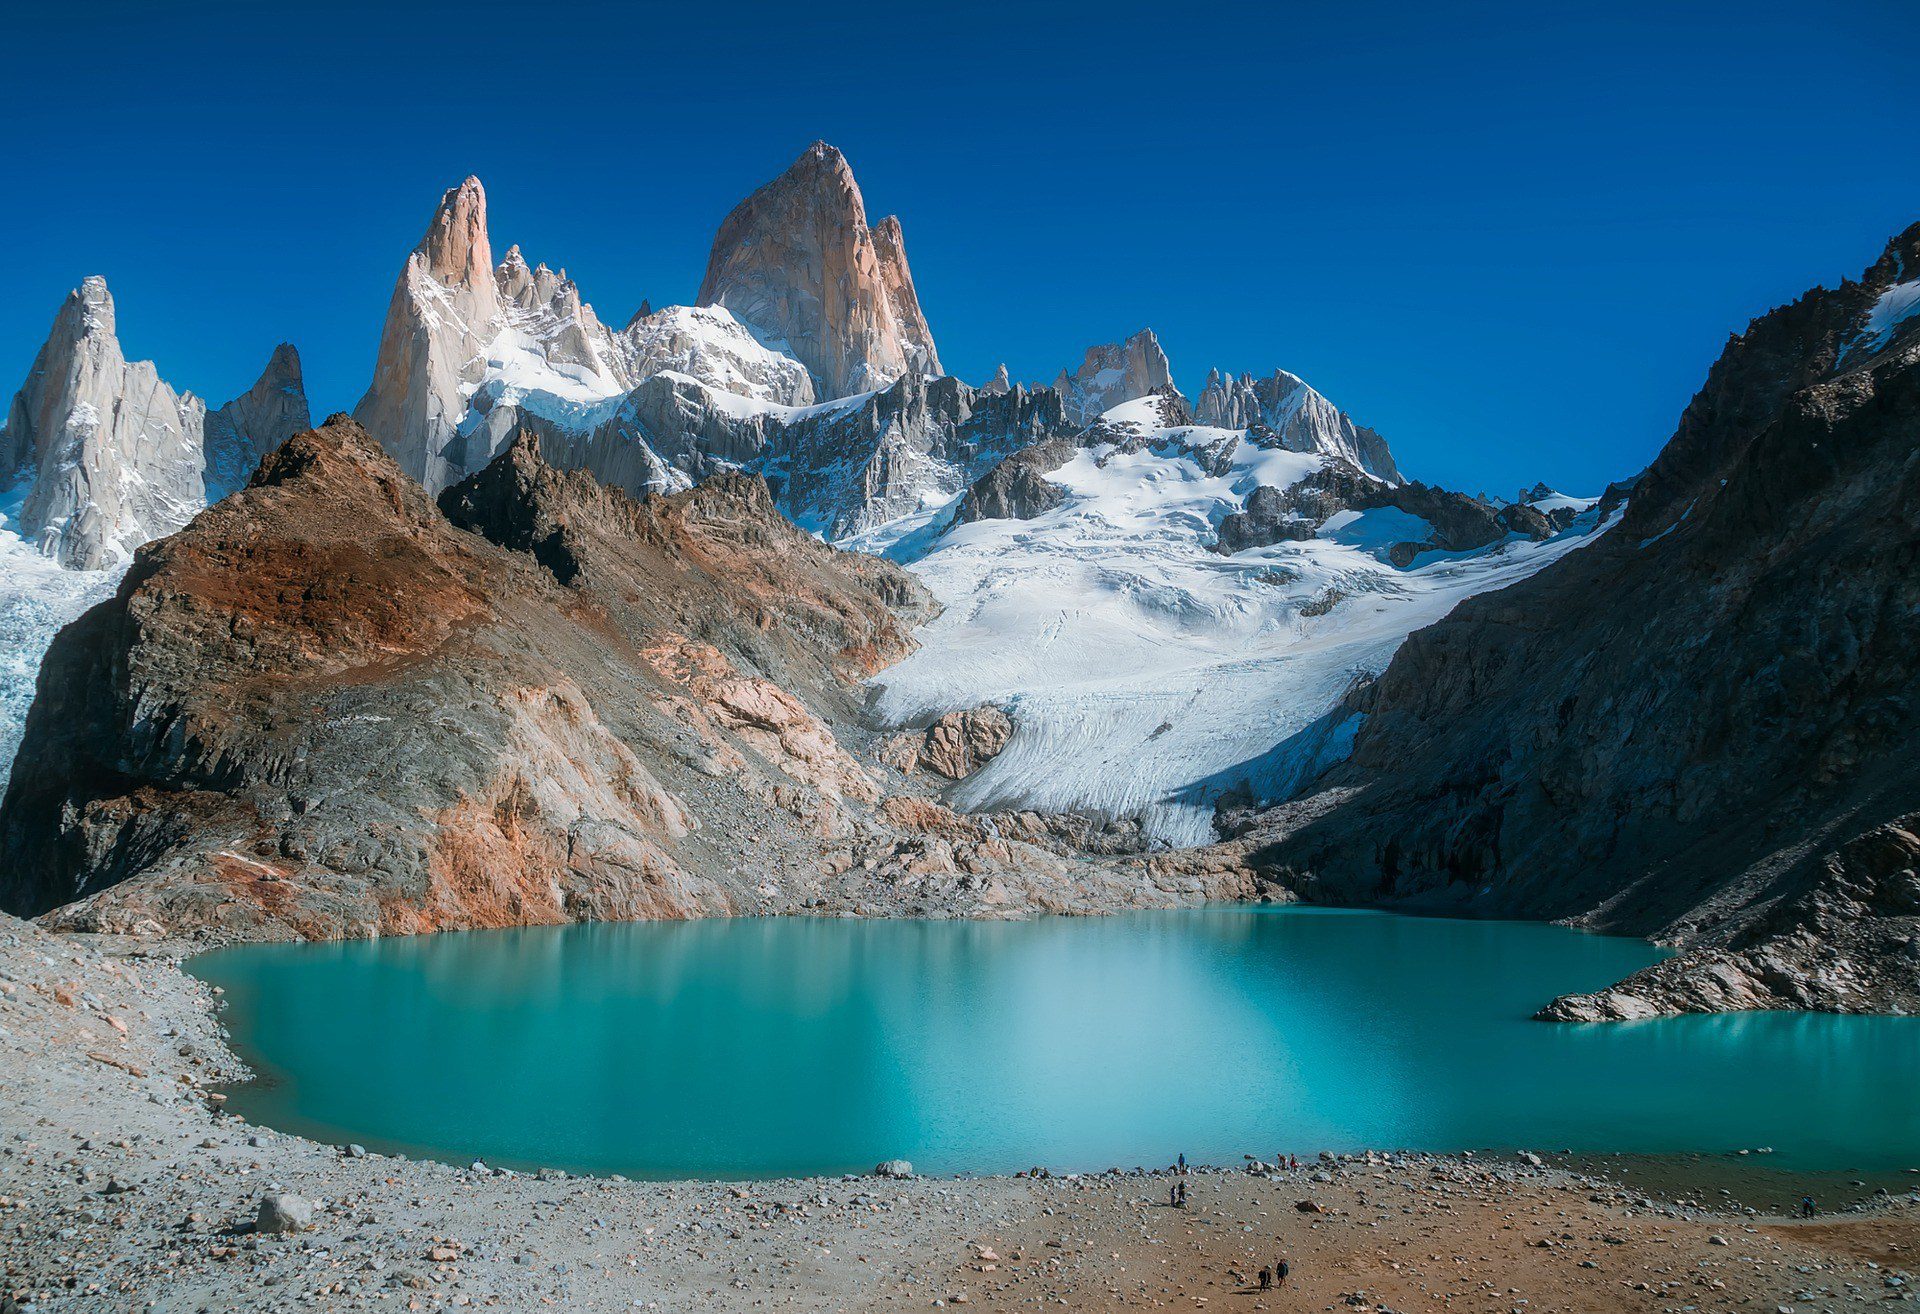 Planning a trip to Patagonia